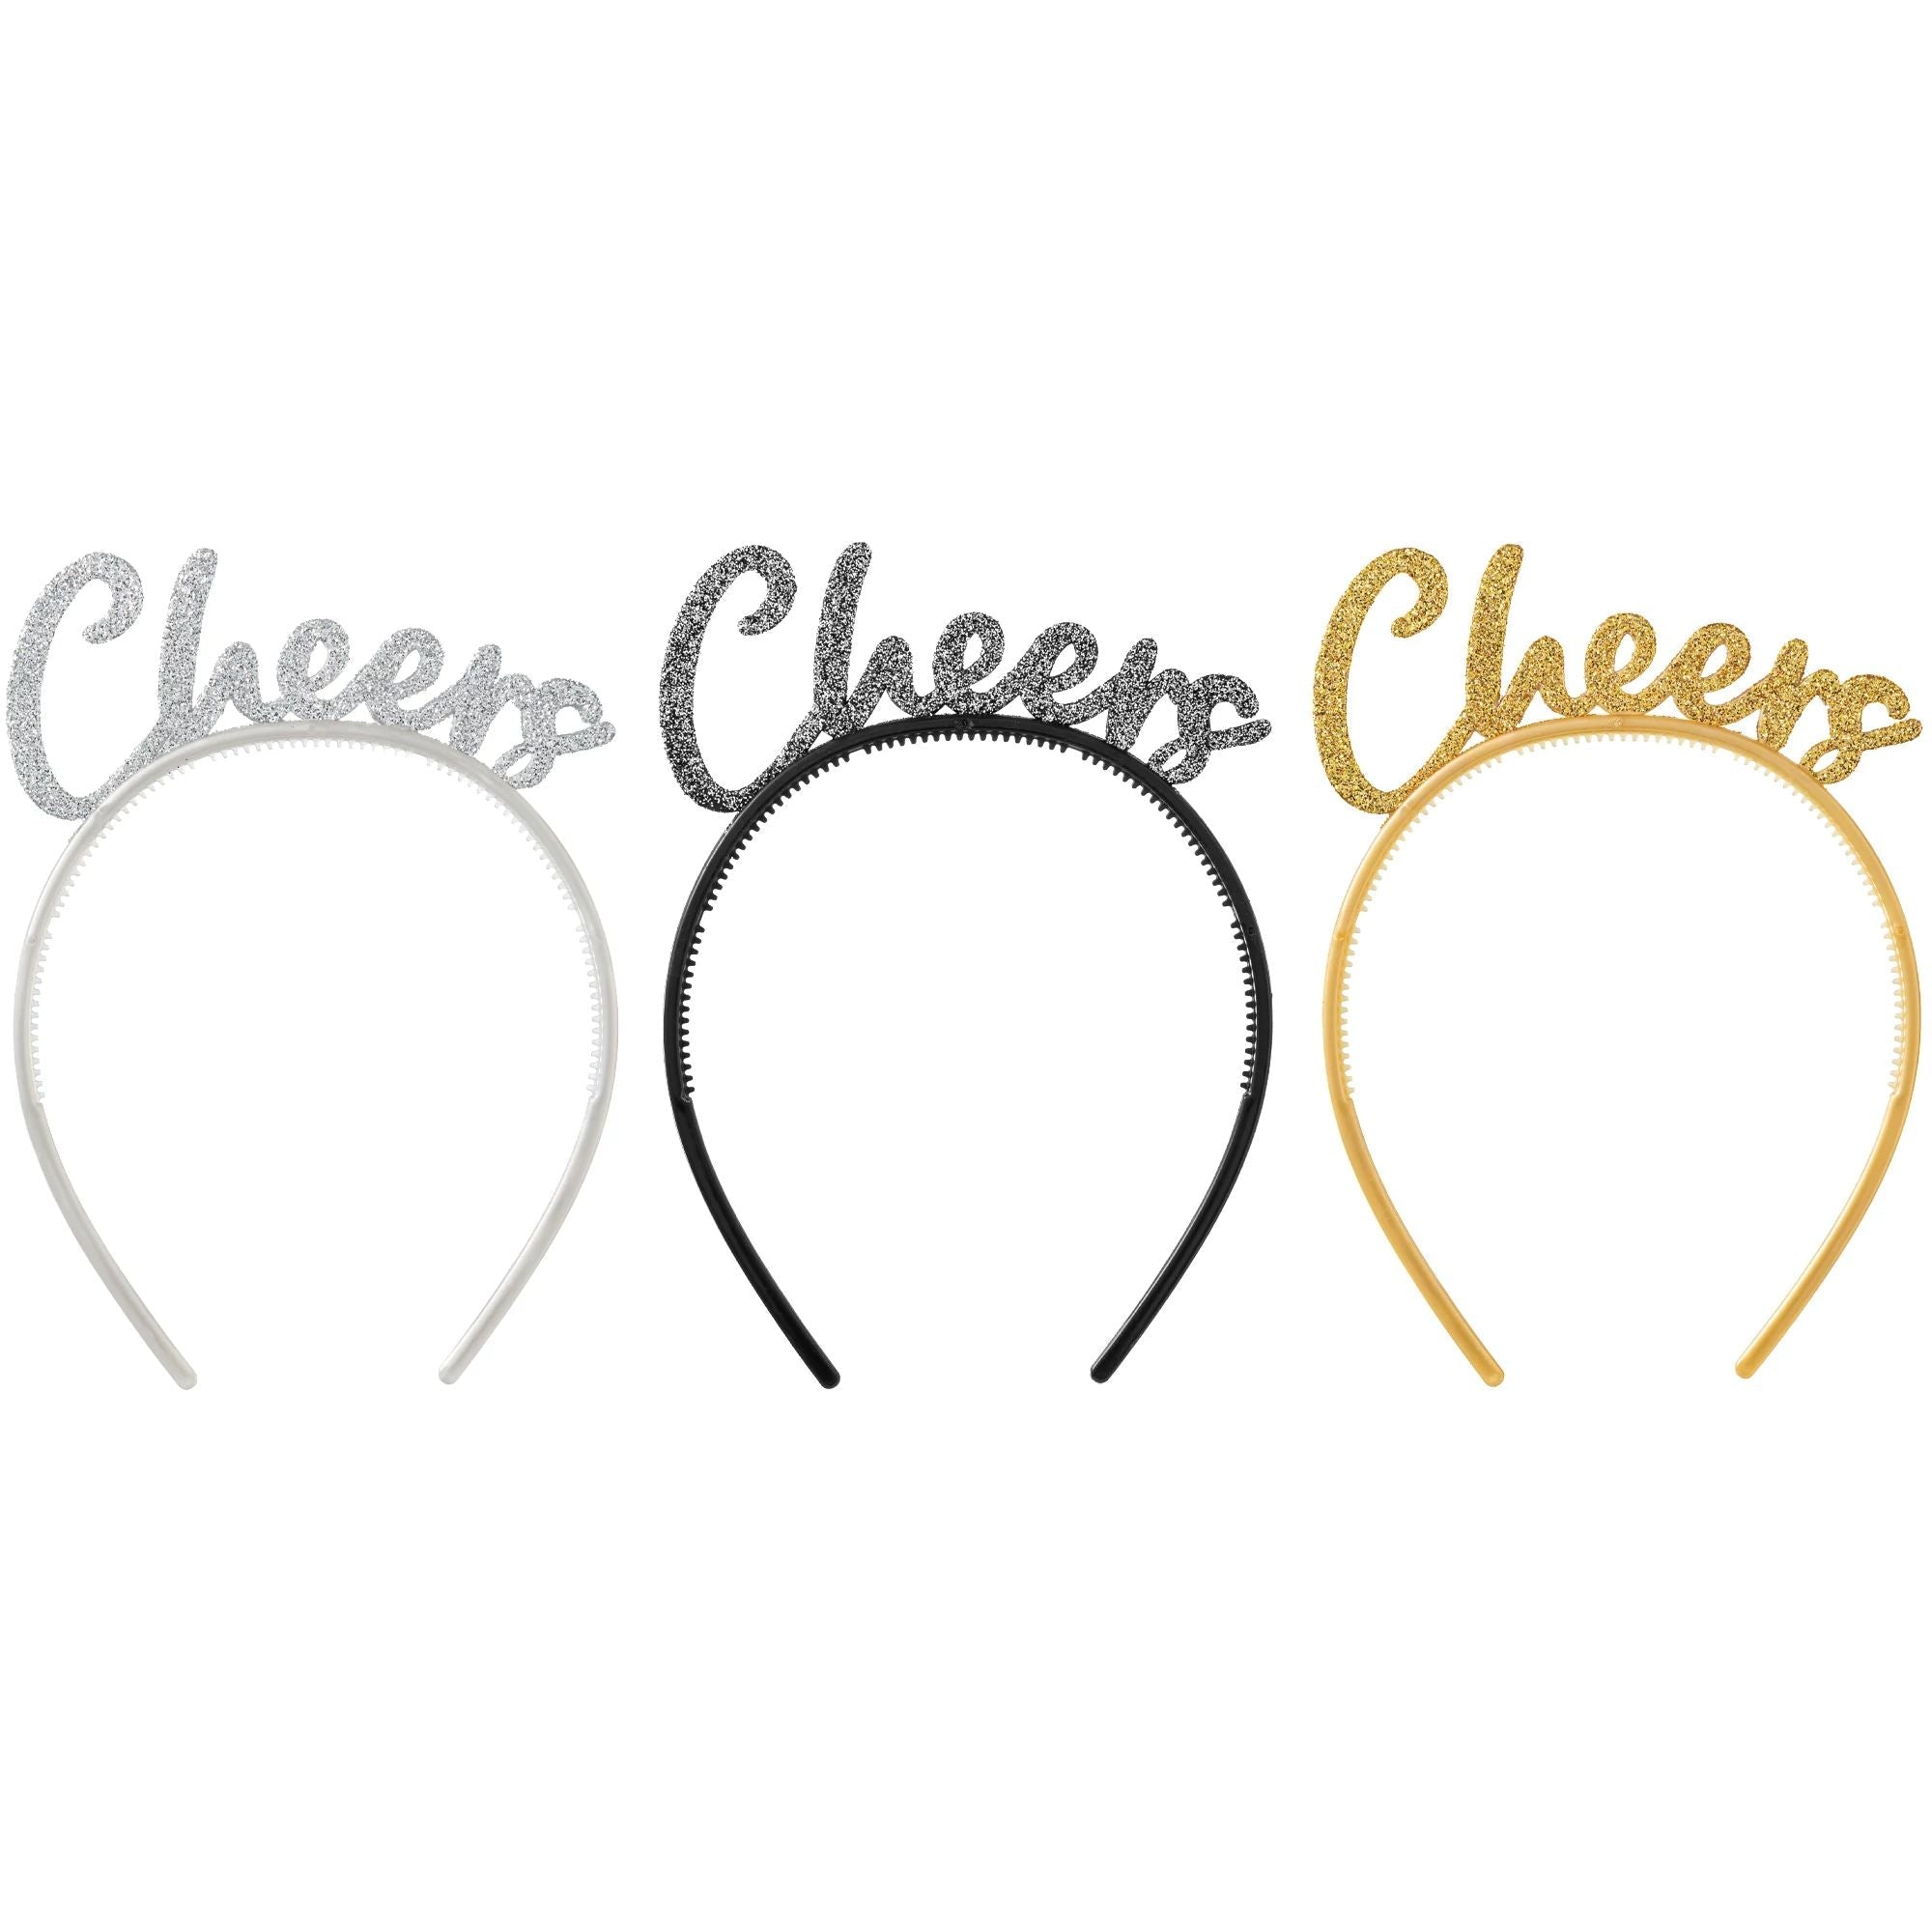 Amscan HOLIDAY: NEW YEAR'S "Cheers" Headbands - Black, Silver, Gold